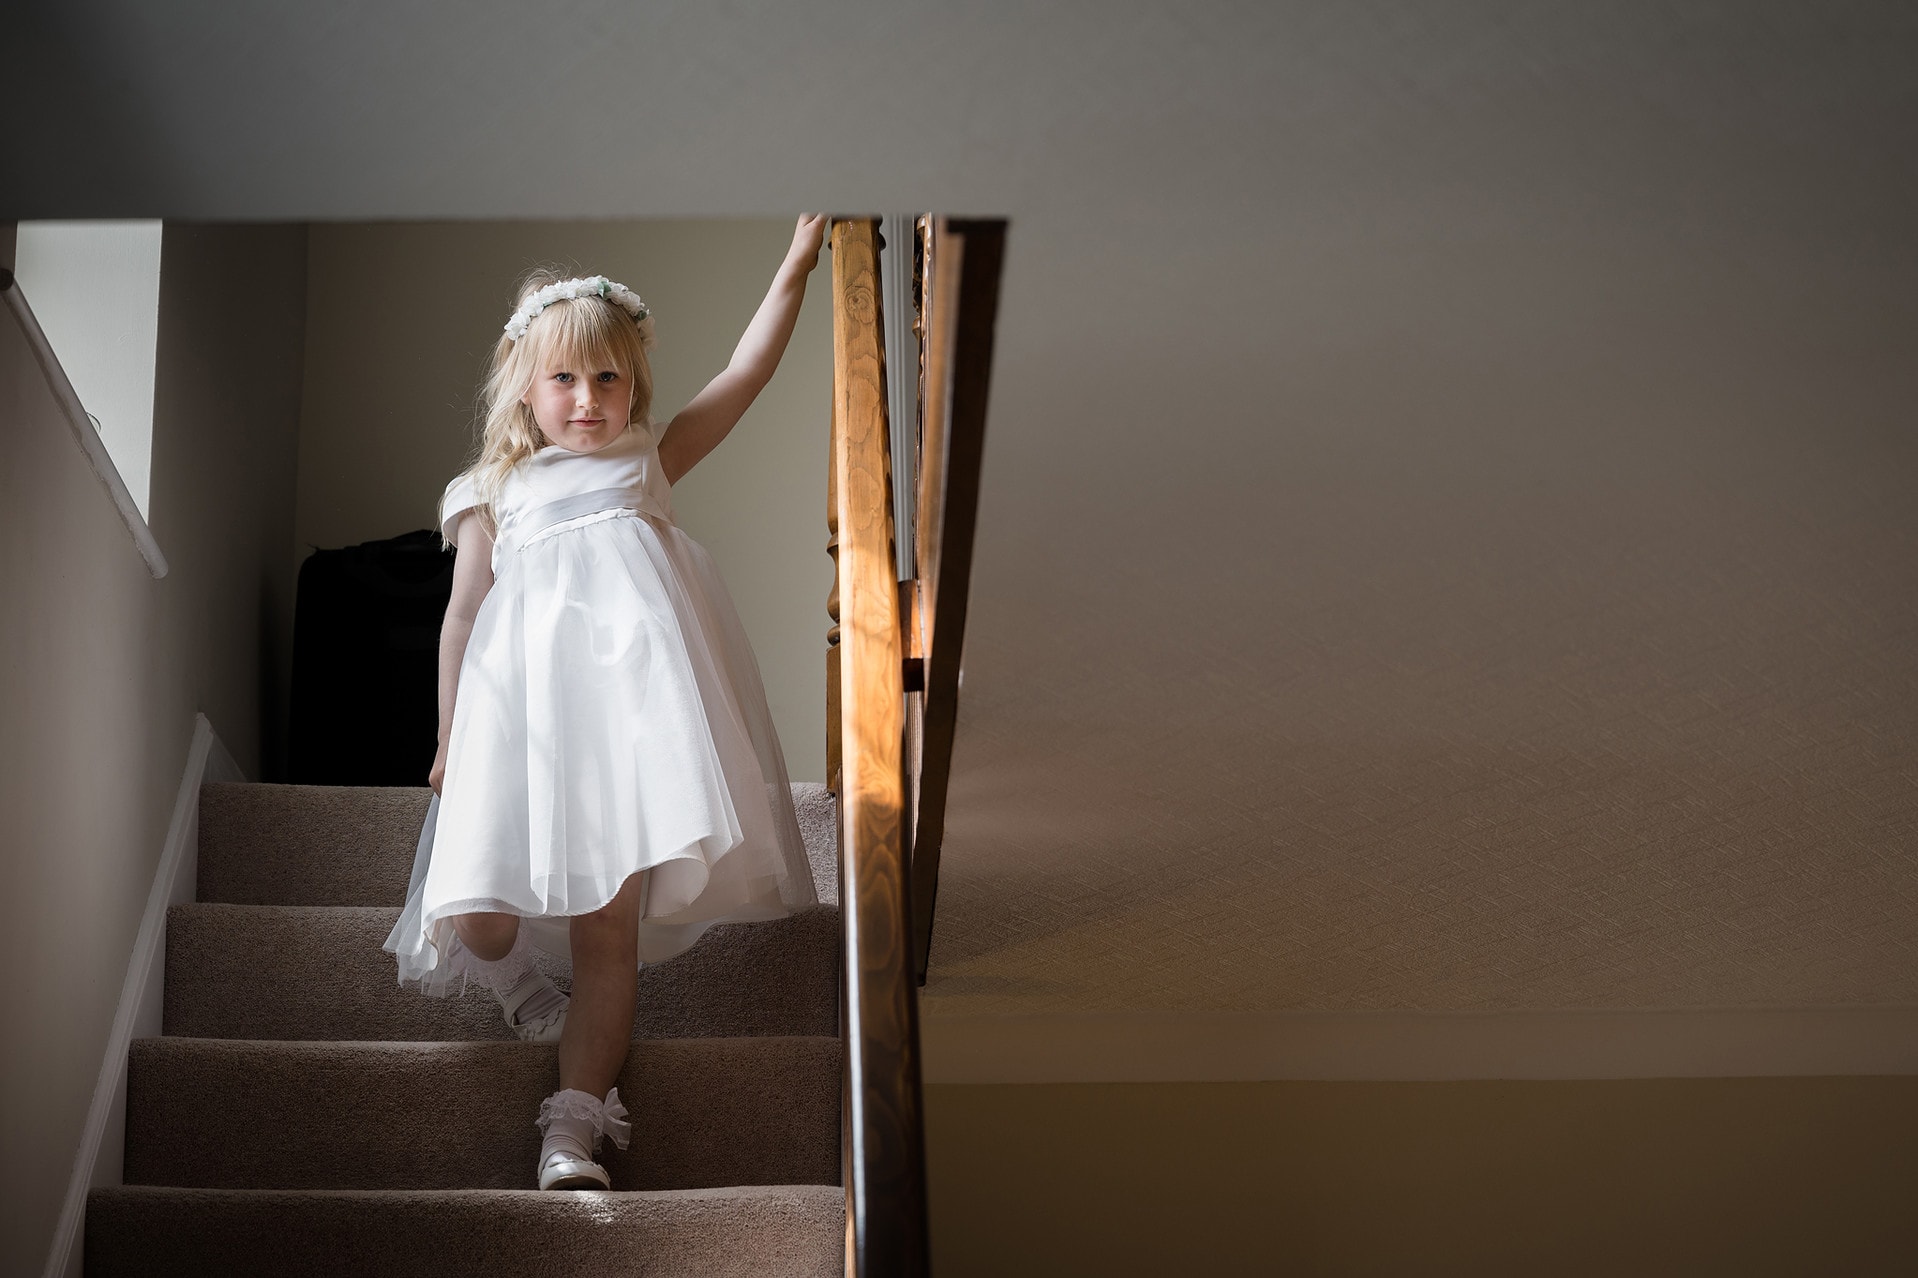 Flower girl stopping to look at the camera as she walks down the stairs